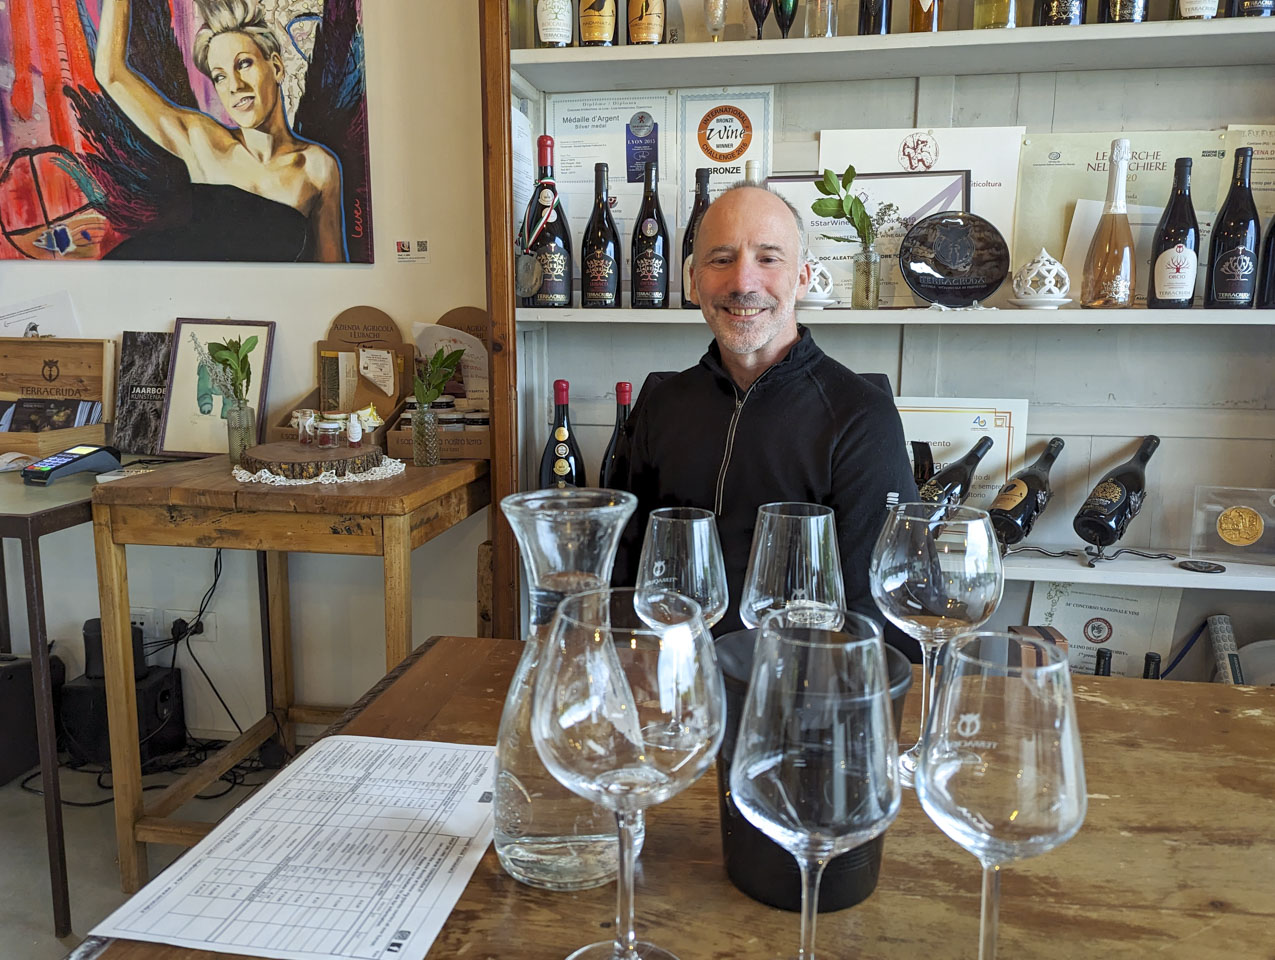 Paul in the tasting area of Terracruda, with wine glasses in front of him.